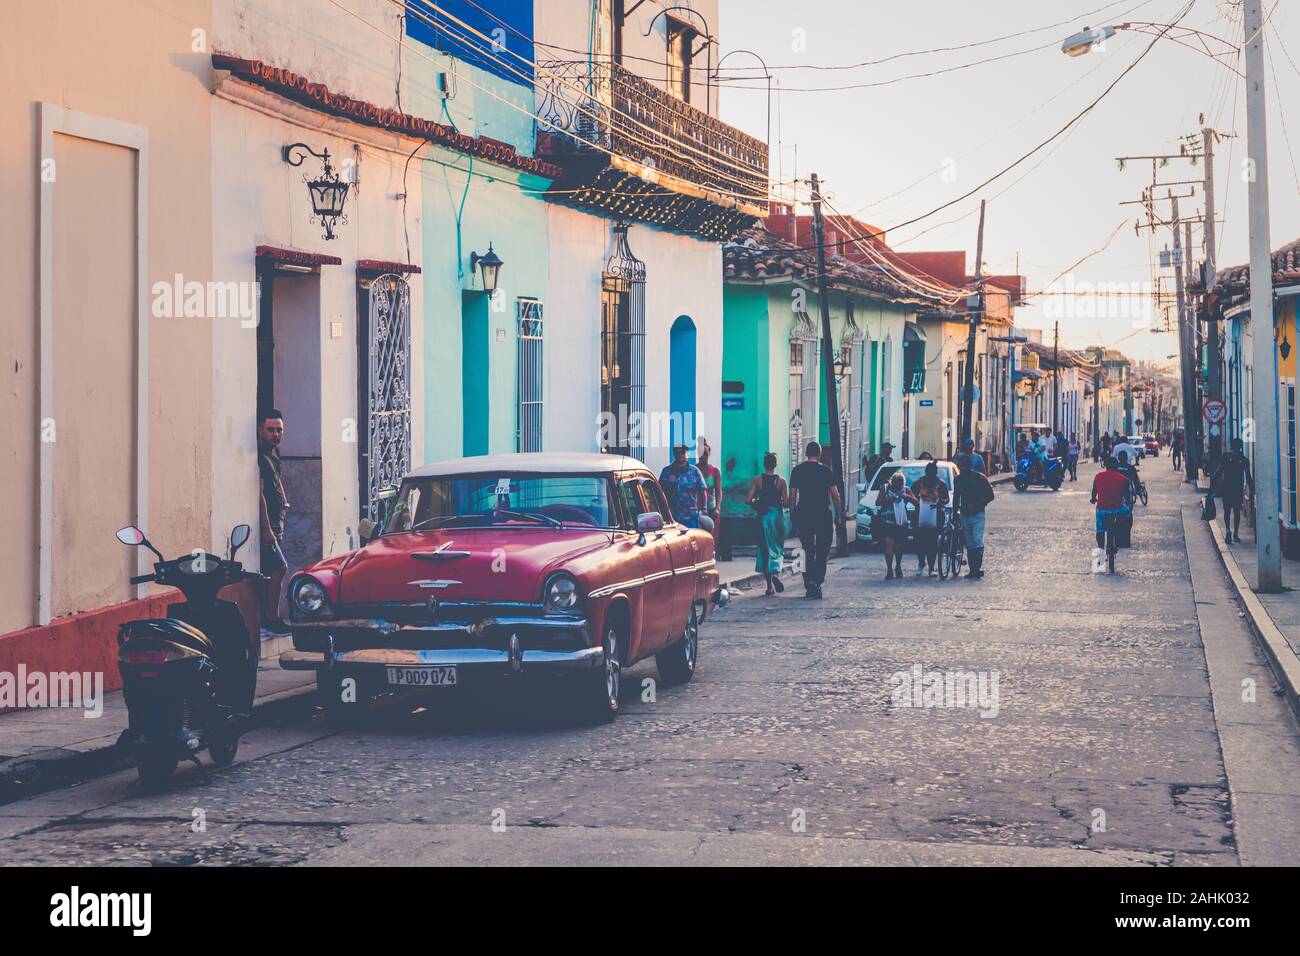 TRINIDAD, CUBA - DECEMBER 16, 2019: Colorful houses and vintage cars in Trinidad, Cuba. Unesco World Heritage Site. Stock Photo